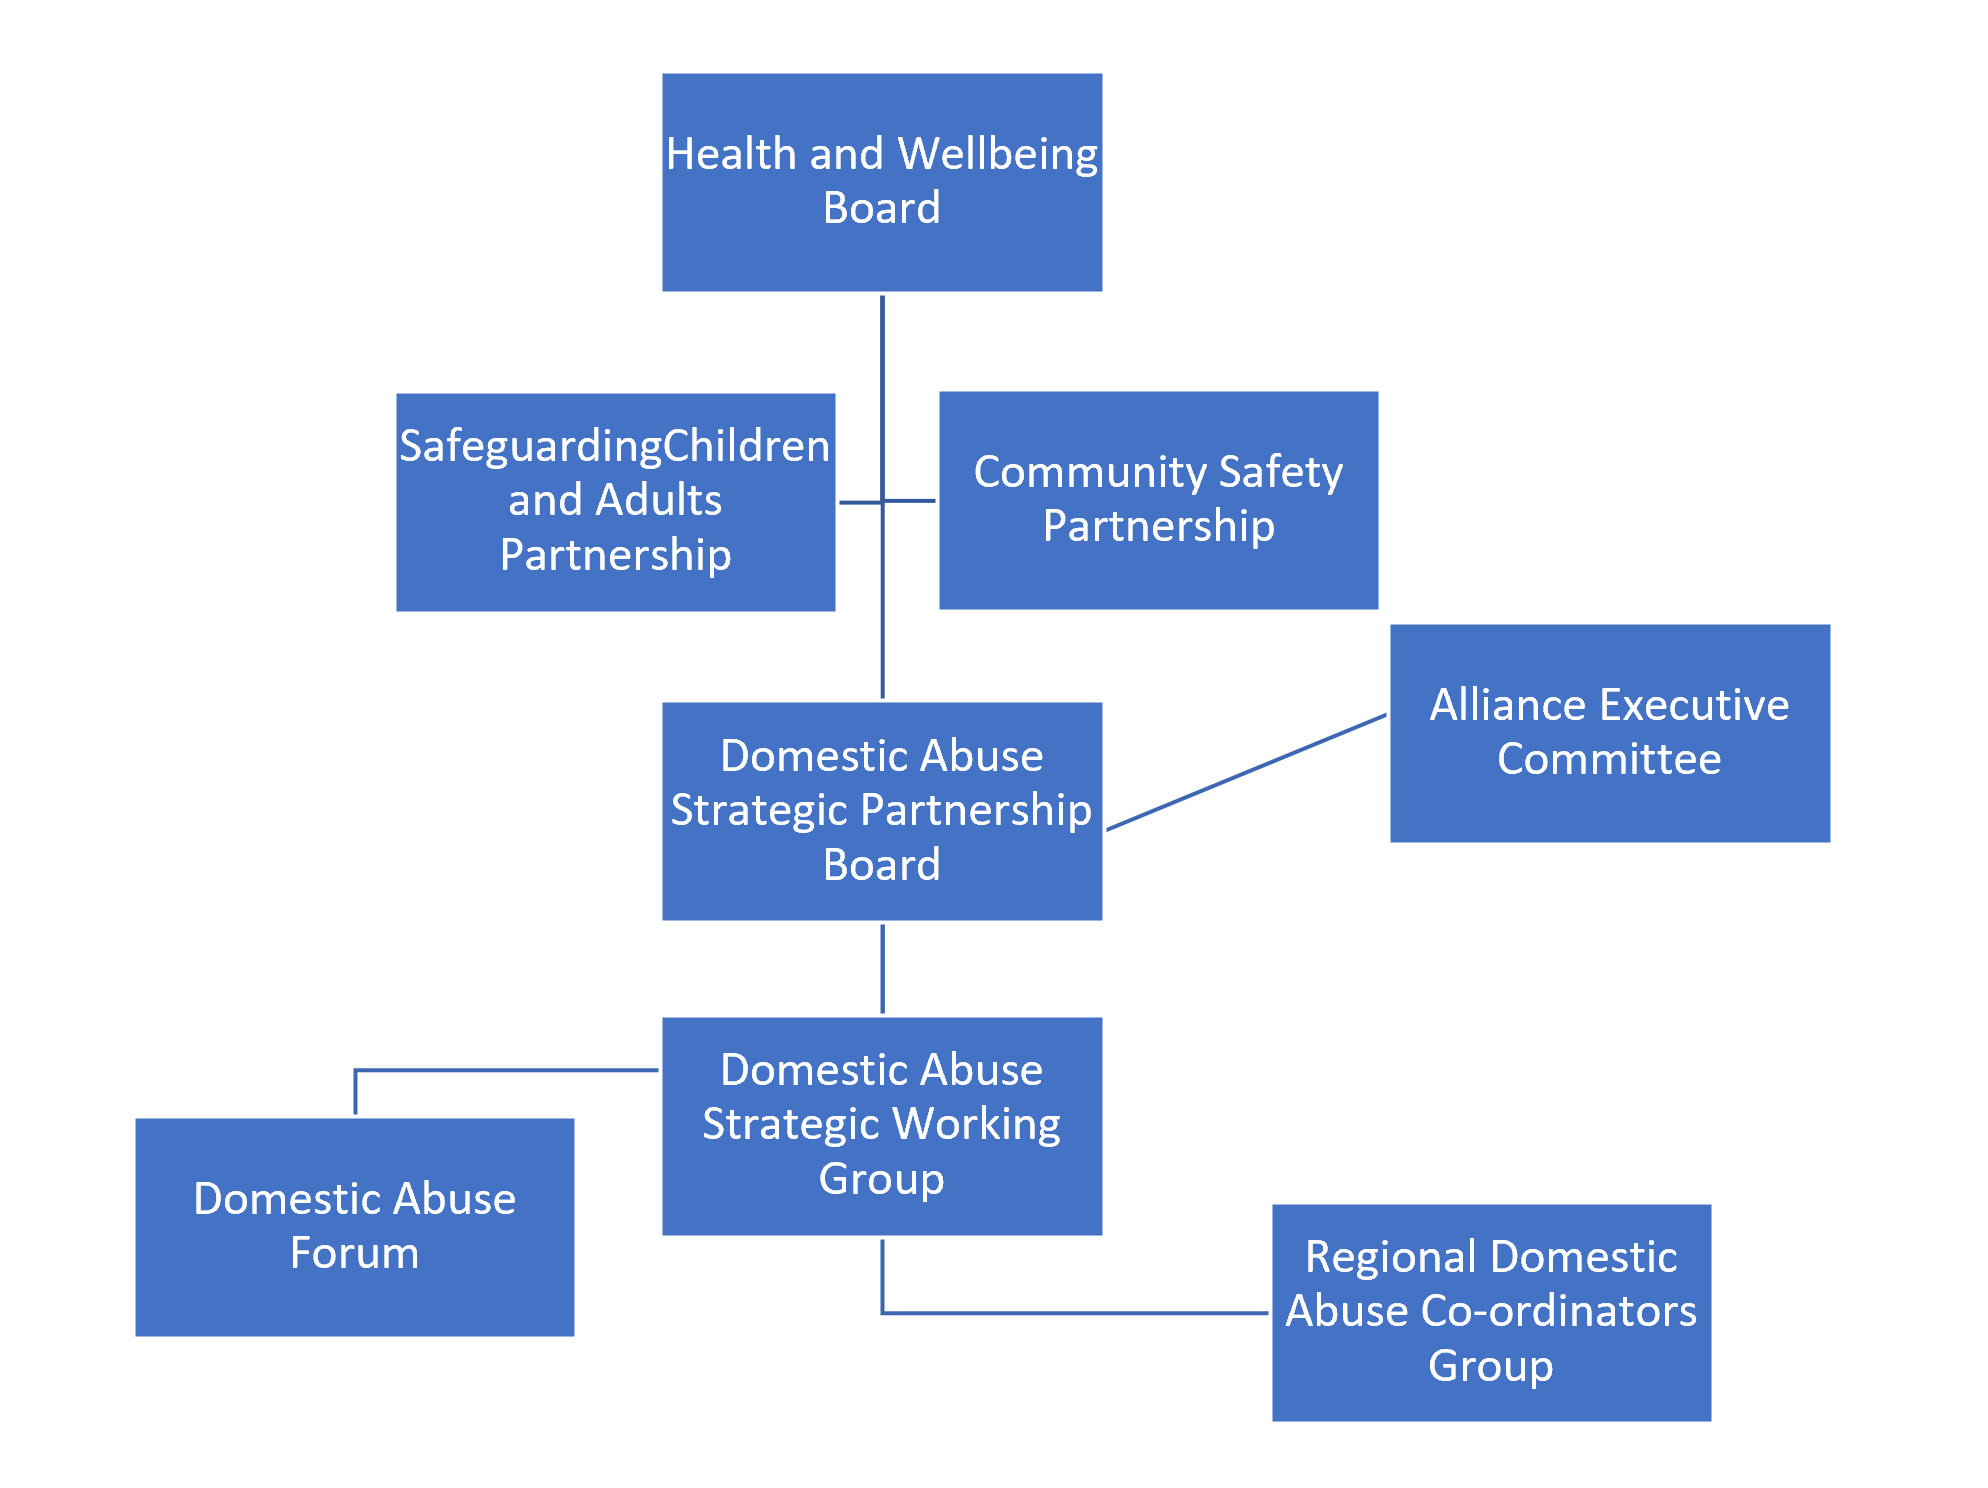 An organisational chart, featuring the following groups: Health and Wellbeing Board, Safeguarding Children and Adults Partnership, Community Safety Partnership, Domestic Abuse Strategic Partnership Board, Alliance Executive Committee, Domestic Abuse Strategic Working Group, Domestic Abuse Forum, and the Regional Domestic Abuse Co-ordinators Group